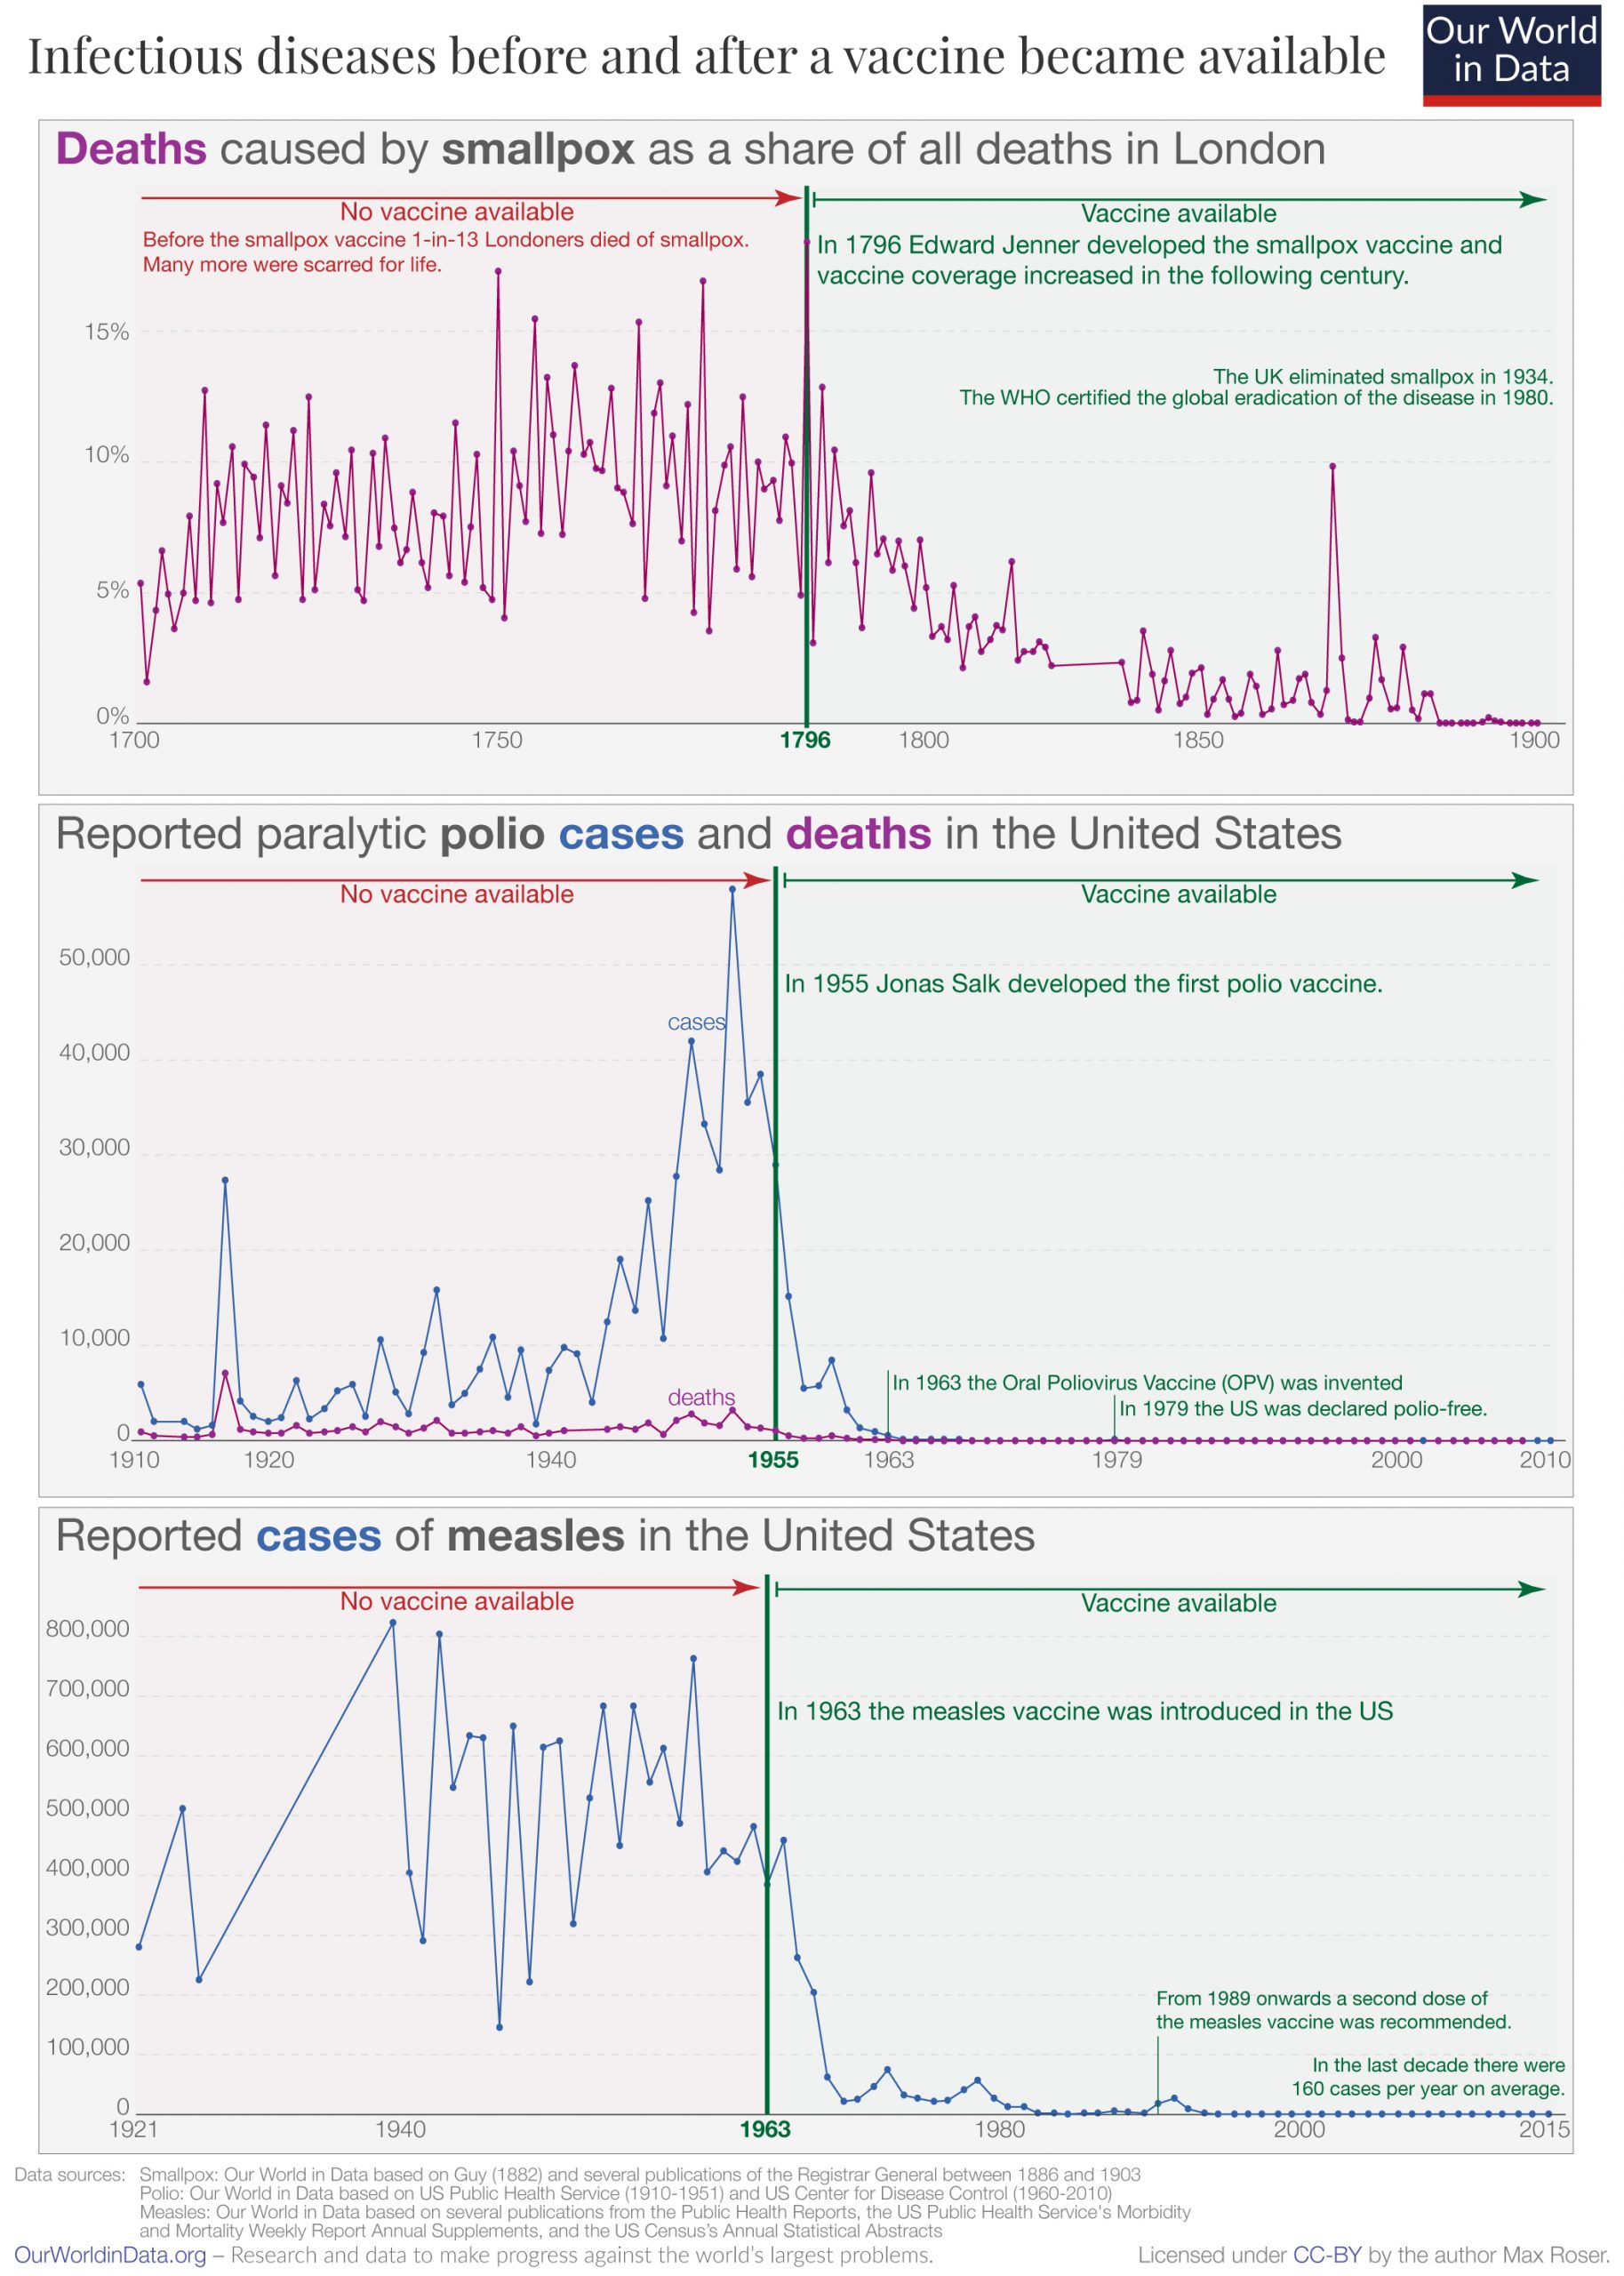 The evolution of three infectious diseases (smallpox, polio and measles) over several decades. You see the data before and after the first vaccination became available.